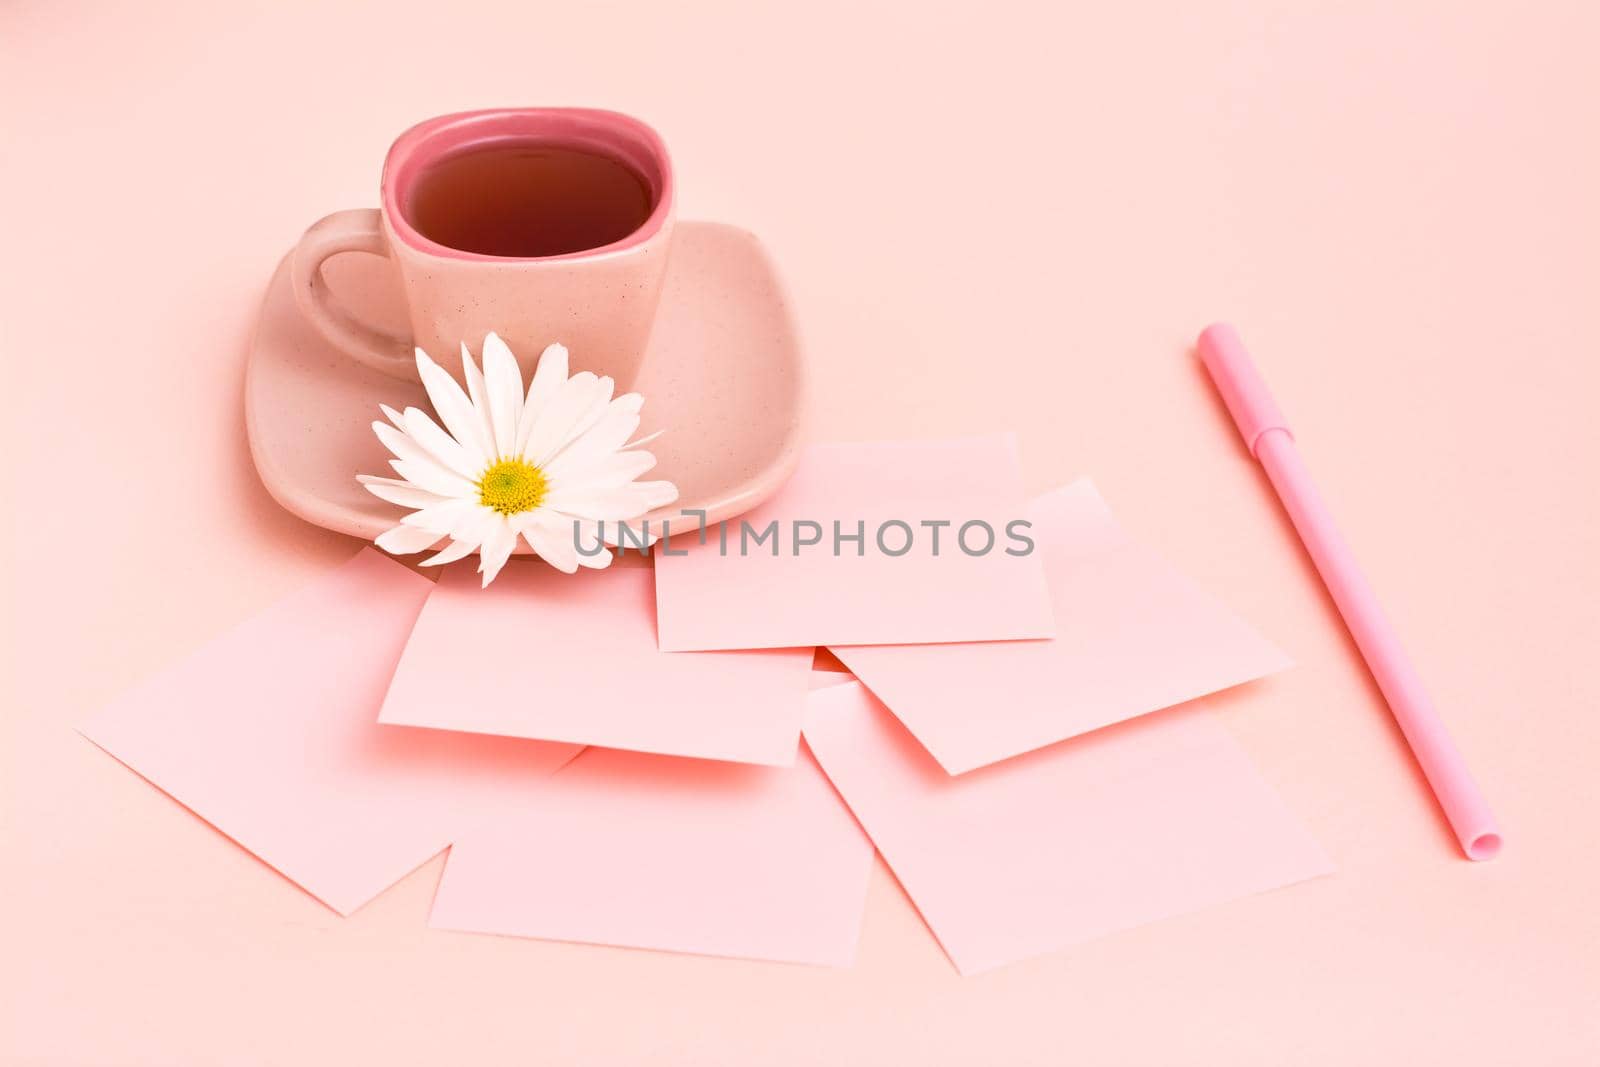 The concept is pink. Pink drink in a coffee cup, sheets for writing, a pen and a chrysanthemum on a pink background. by Aleruana